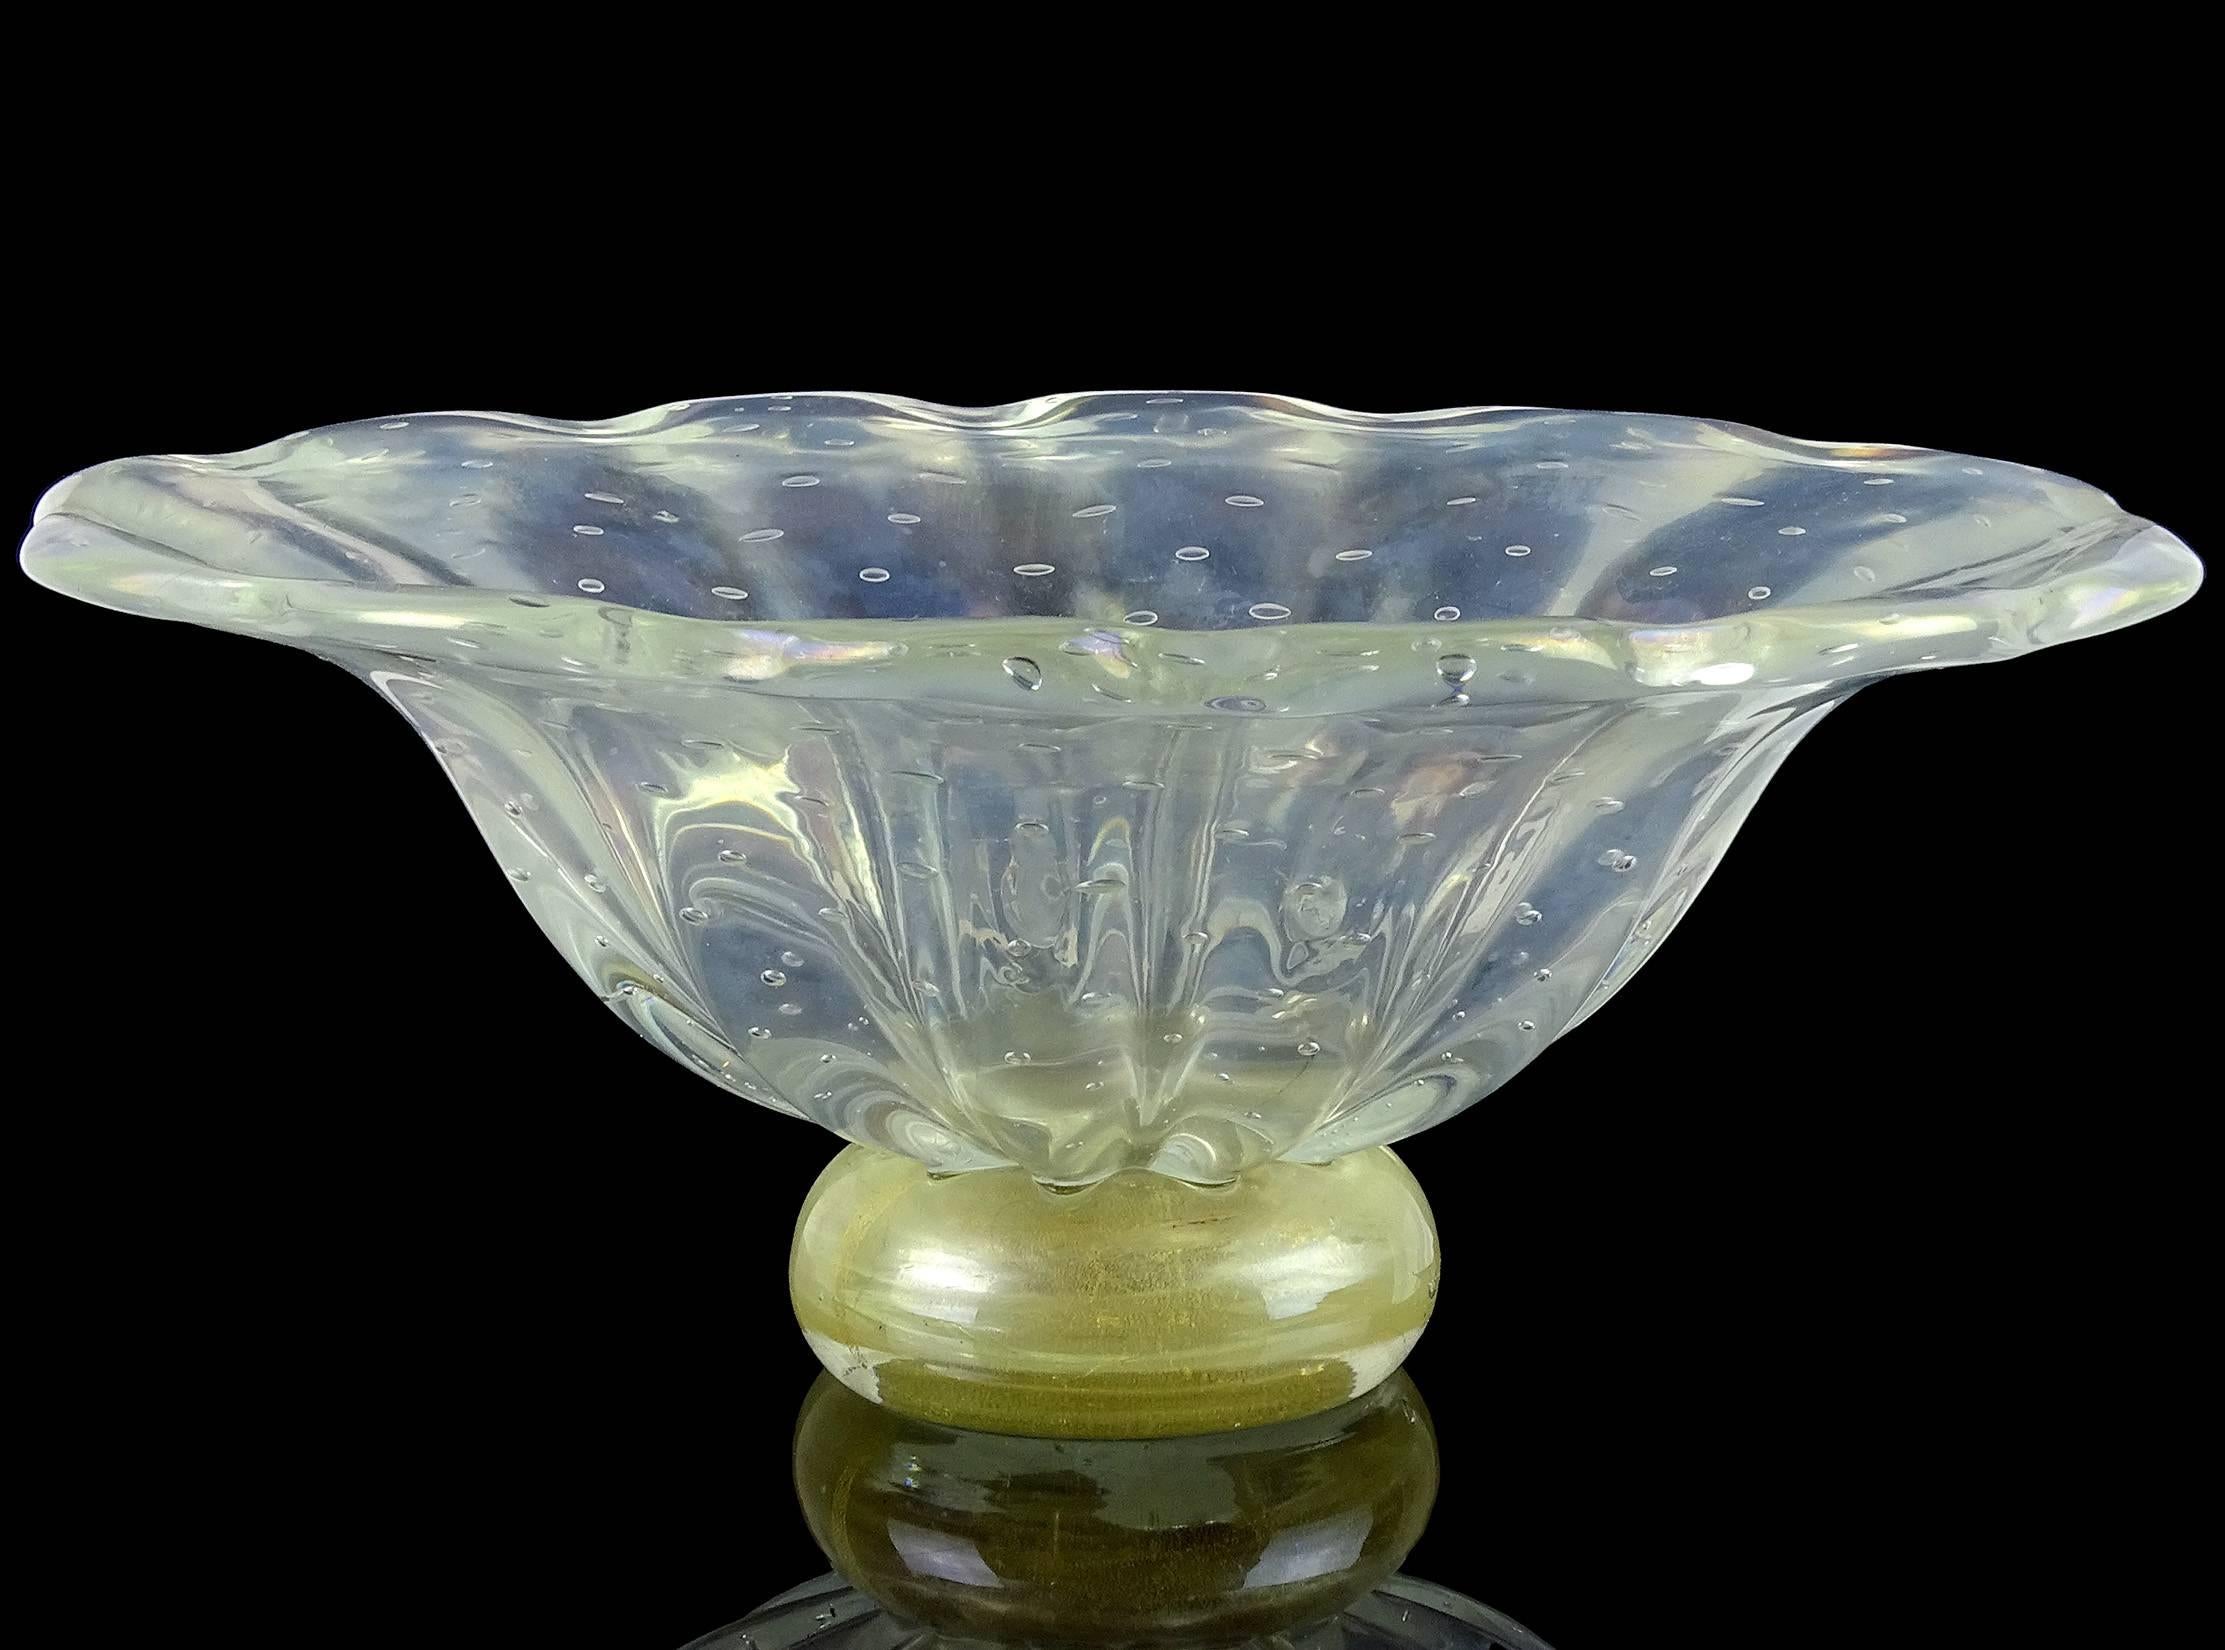 Beautiful large Murano handblown iridescent, controlled bubbles and gold flecks Italian art glass centrepiece bowl. Attributed to the Barovier e Toso company. The piece stands on a gold leaf base, and has heavy iridescence throughout. Measures 12